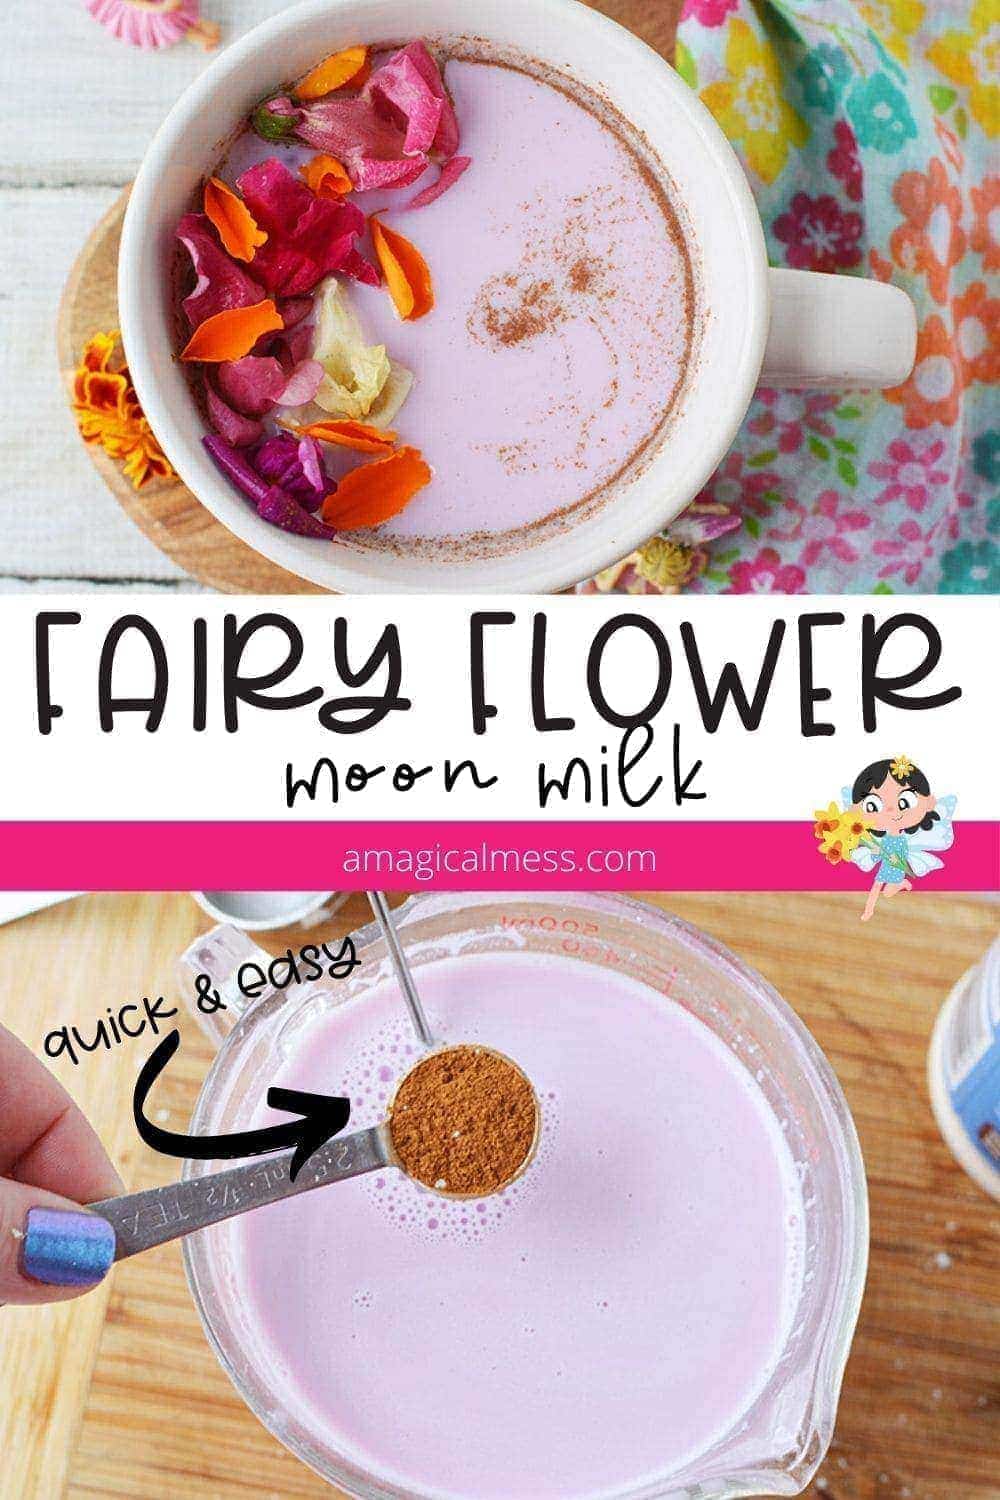 Pink moon milk with flowers on top